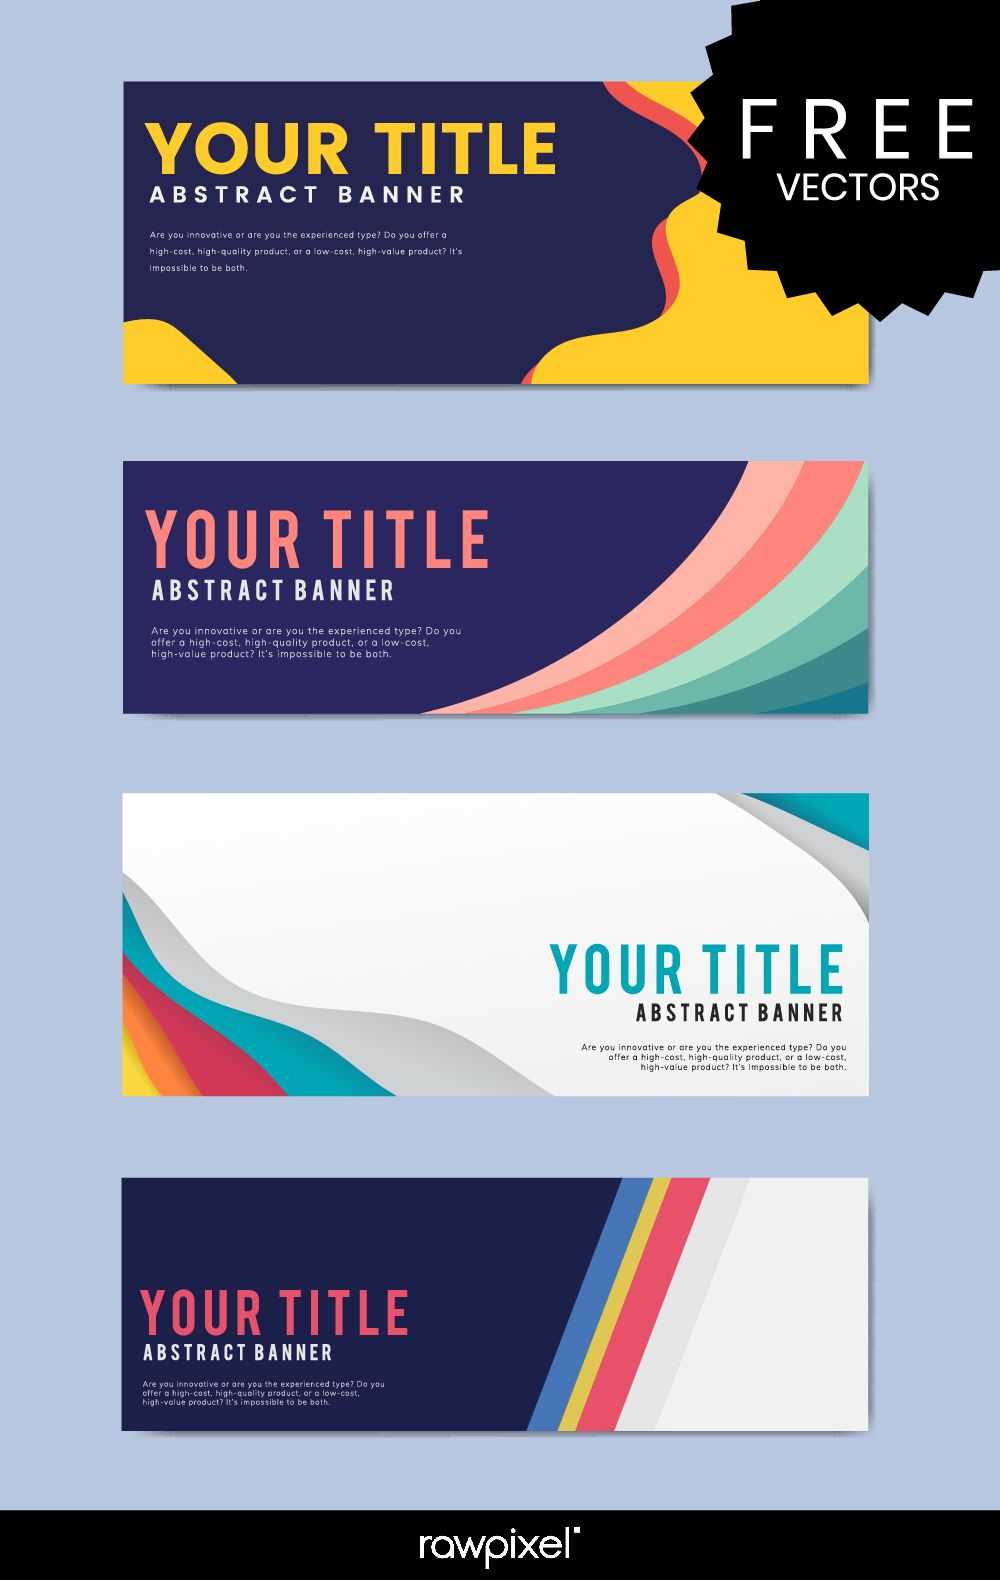 Download Free Modern Business Banner Templates At Rawpixel Inside Website Banner Templates Free Download